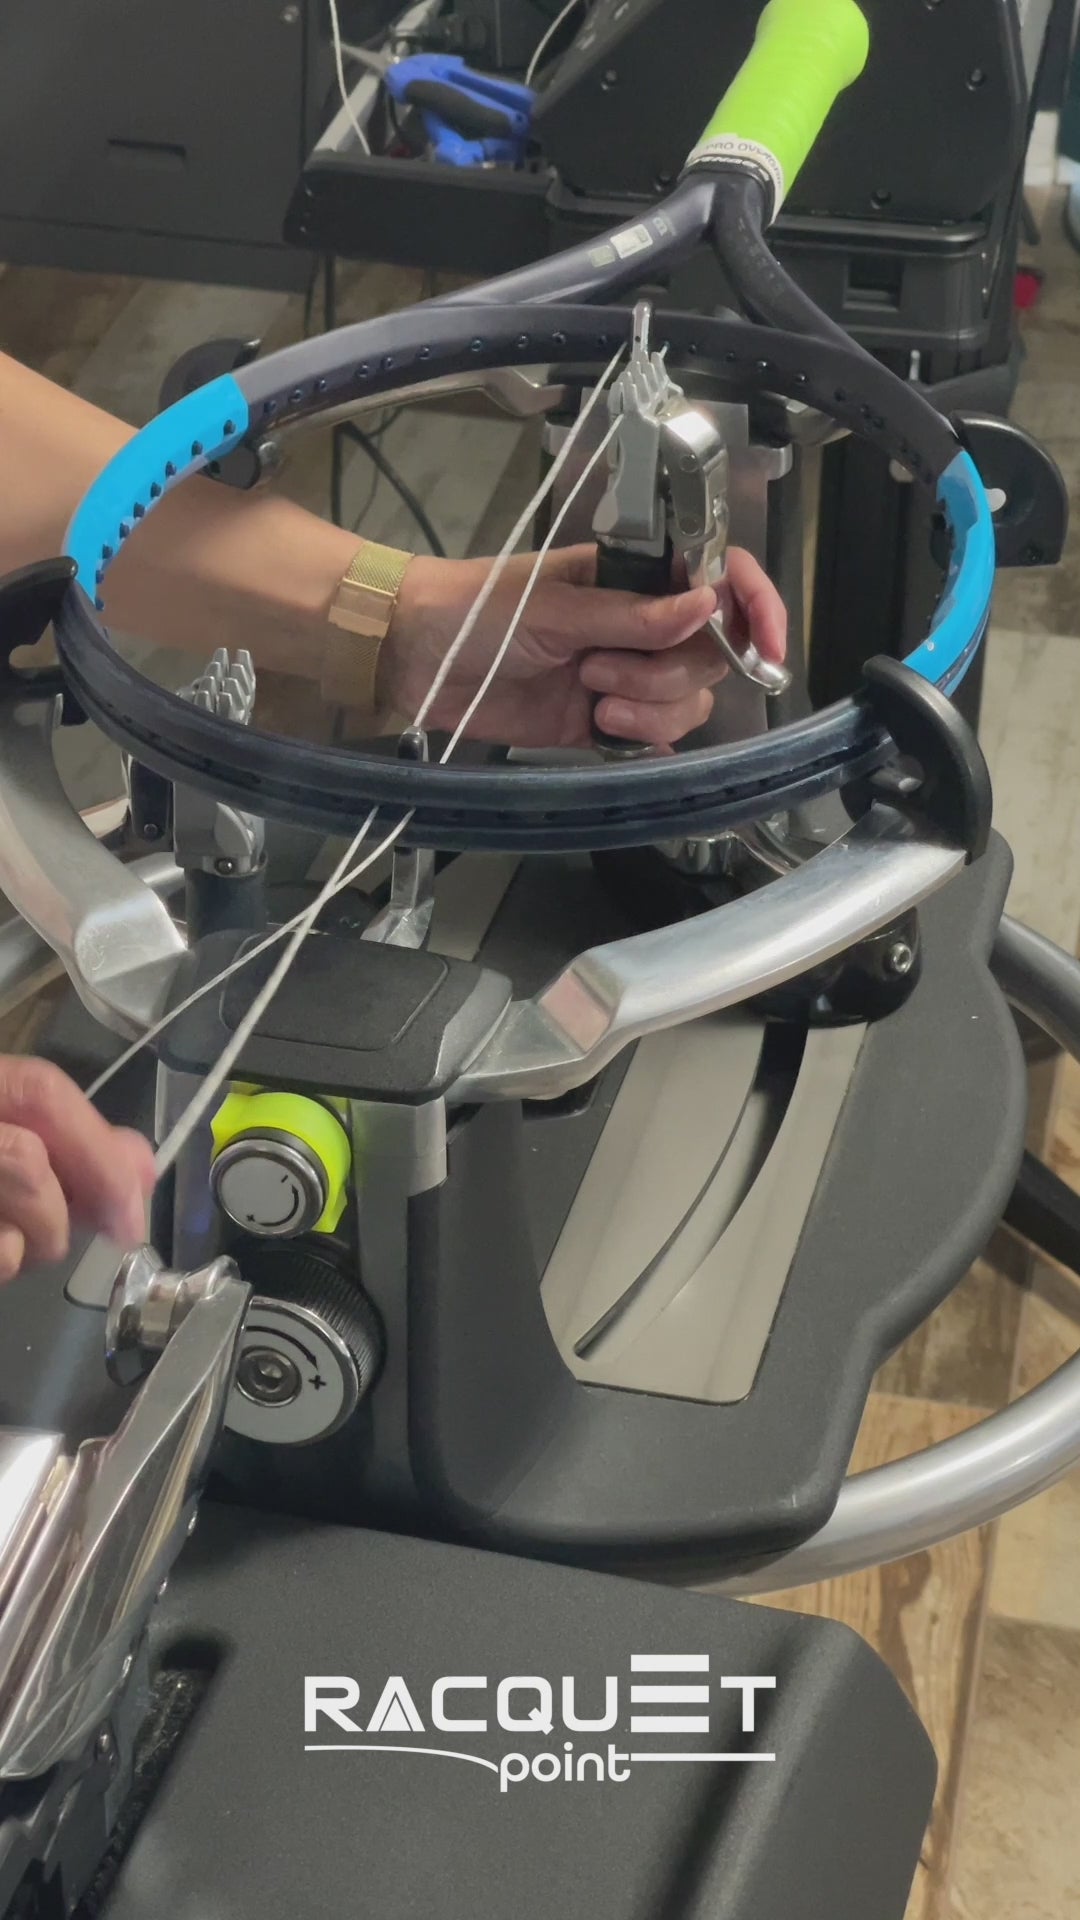 Video showing the step-by-step process of Racquet Point's racquet repair